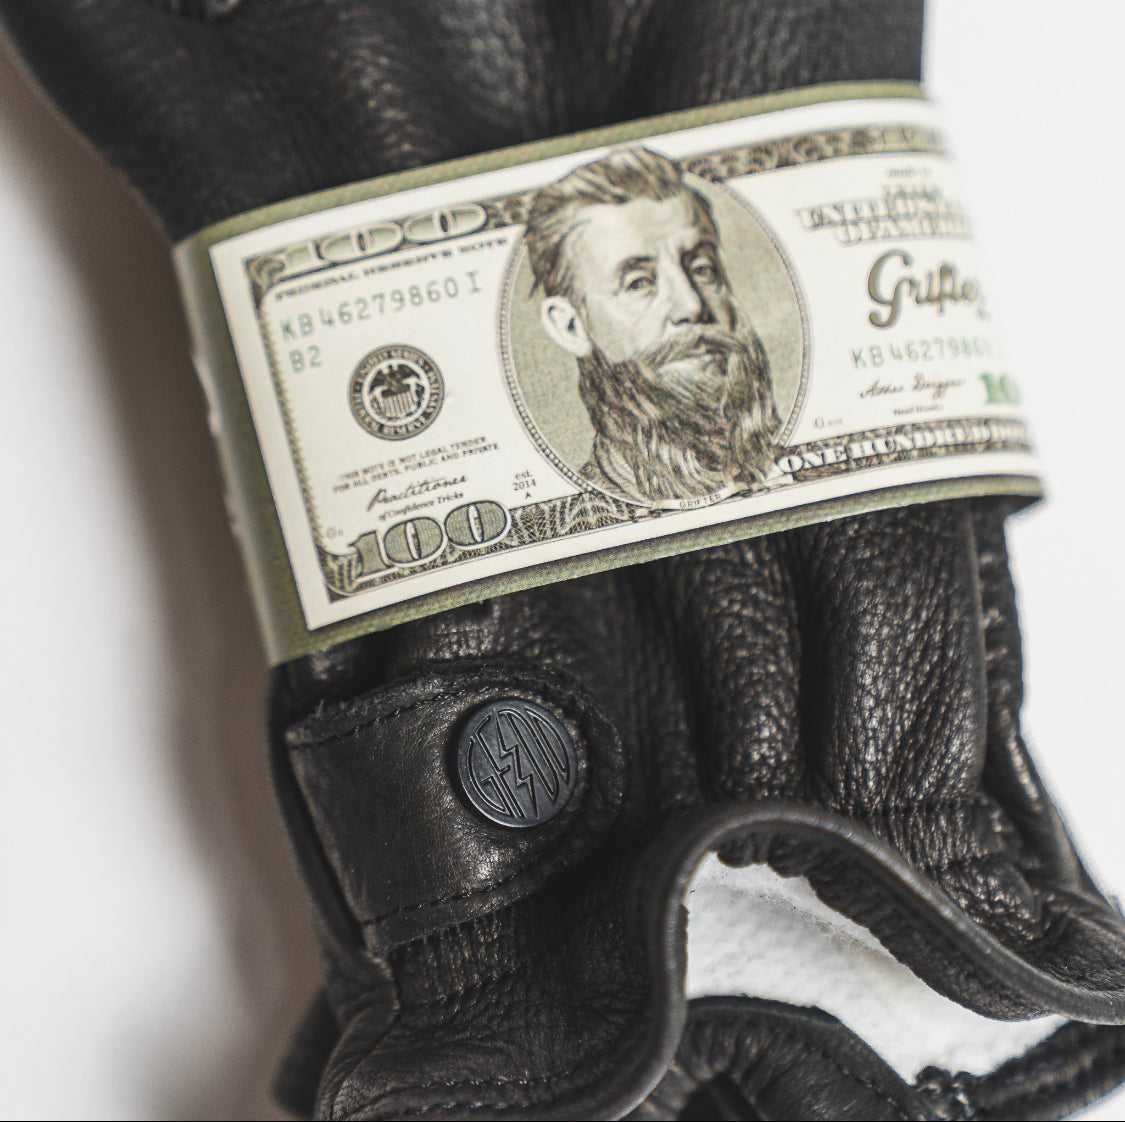 The GFDD x Grifter “Gambino” Gloves – Go Fast Don't Die